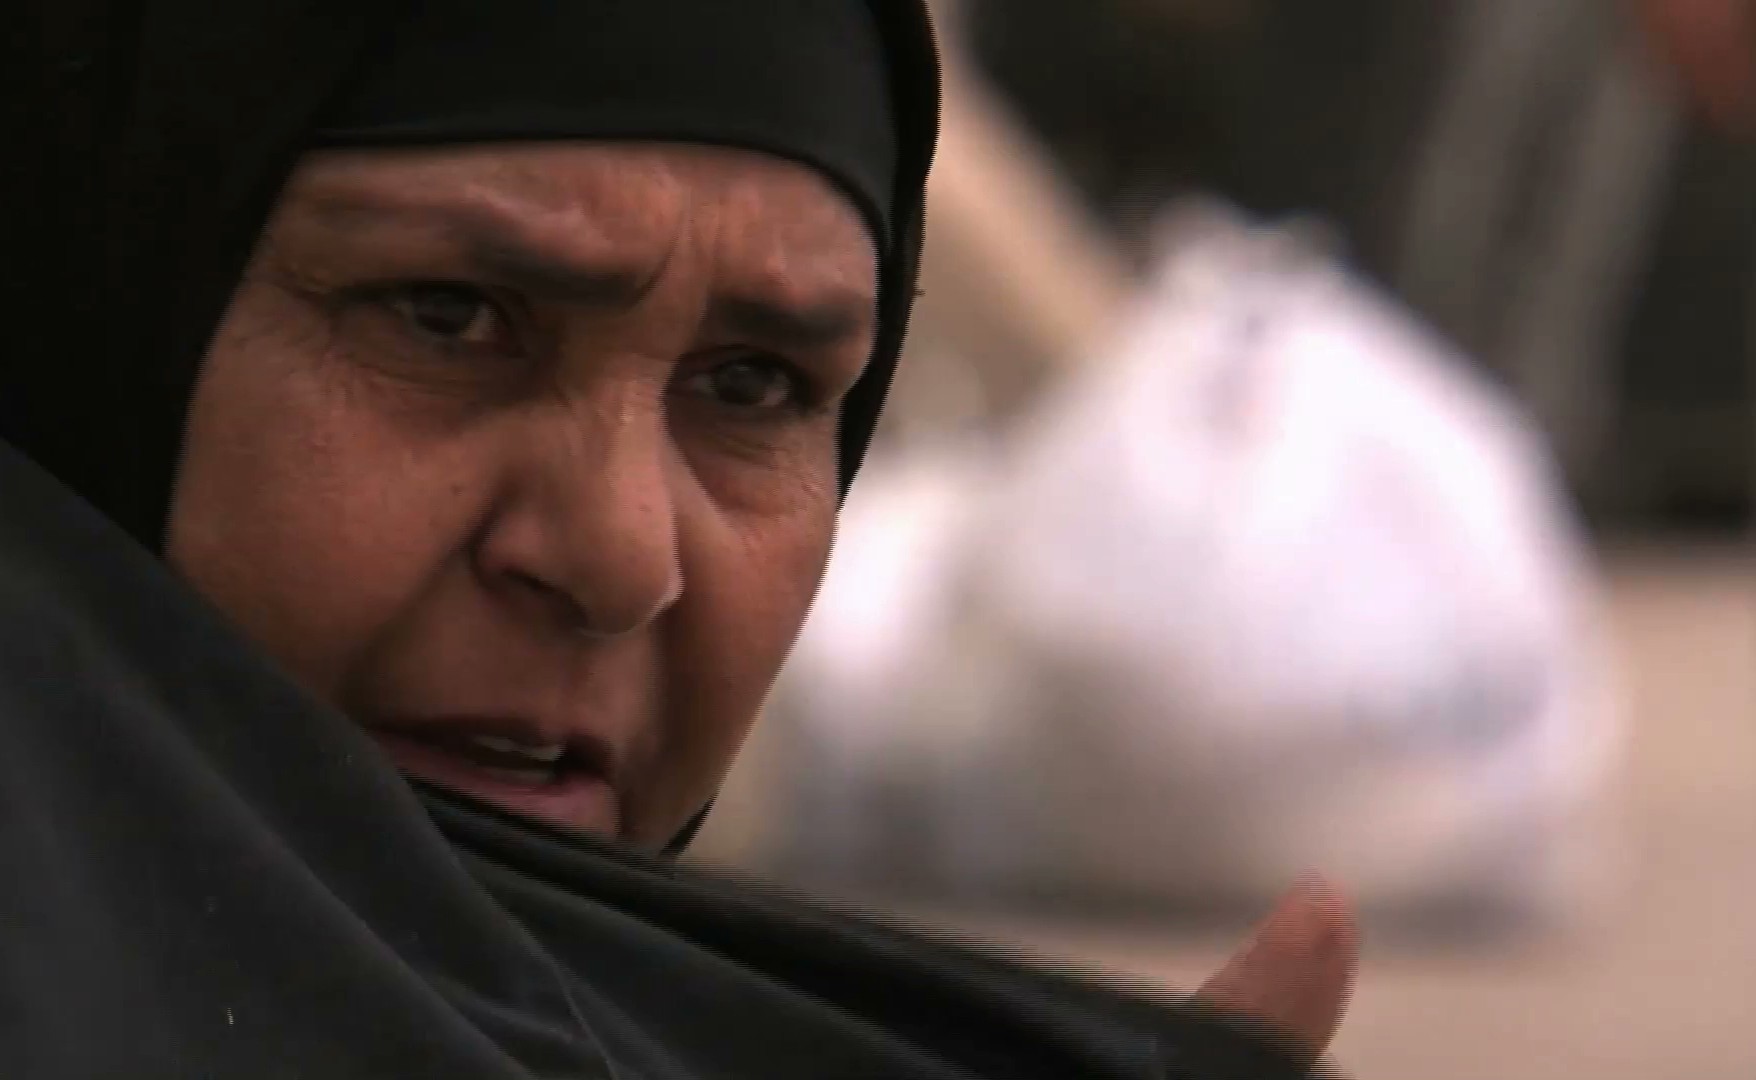 Iraq: A country of widows